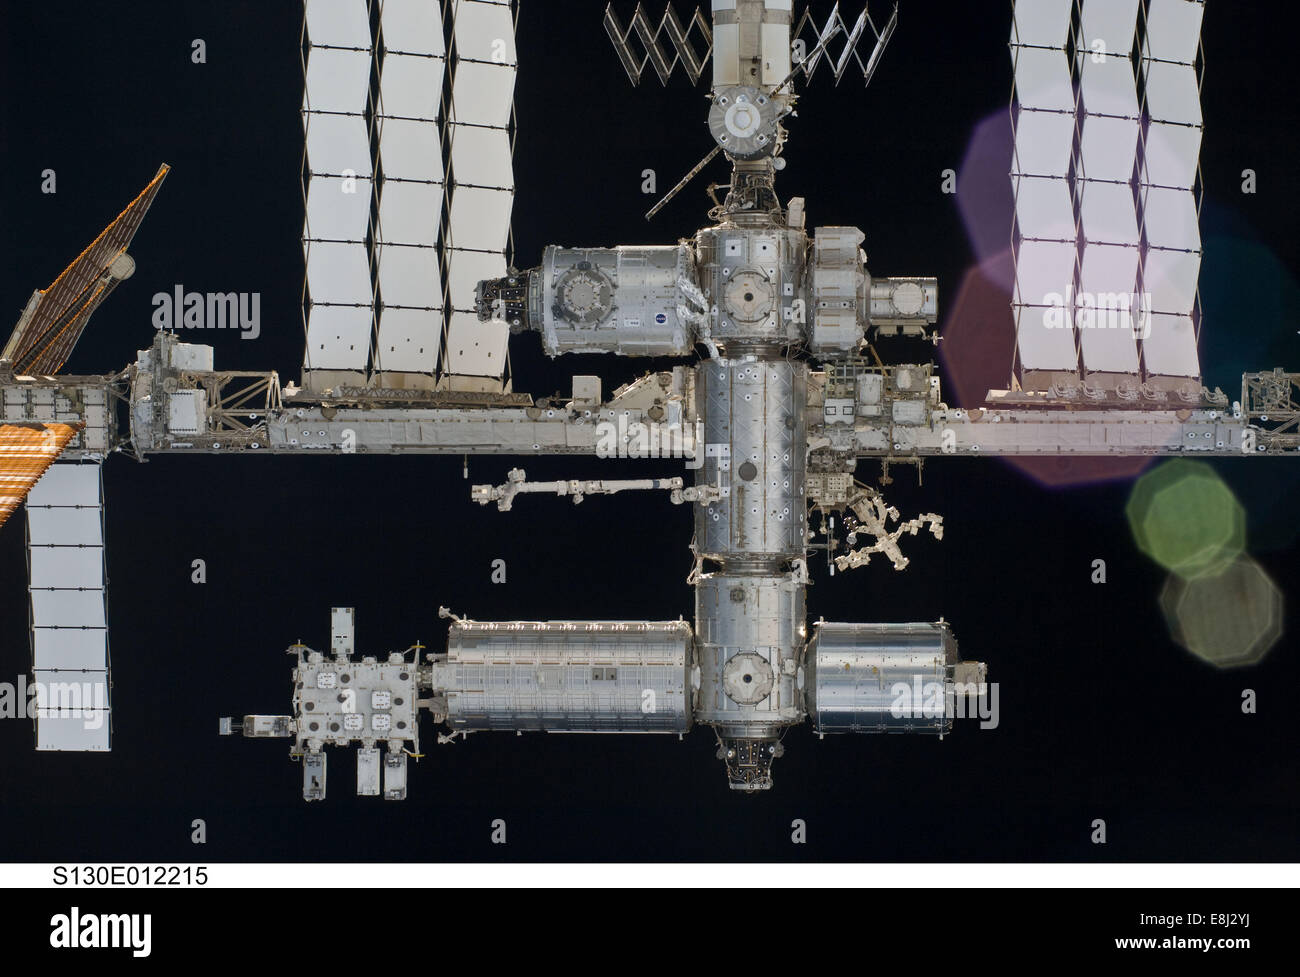 A close-up view of a portion of the International Space Station is featured in this image photographed by an STS-130 crew member Stock Photo